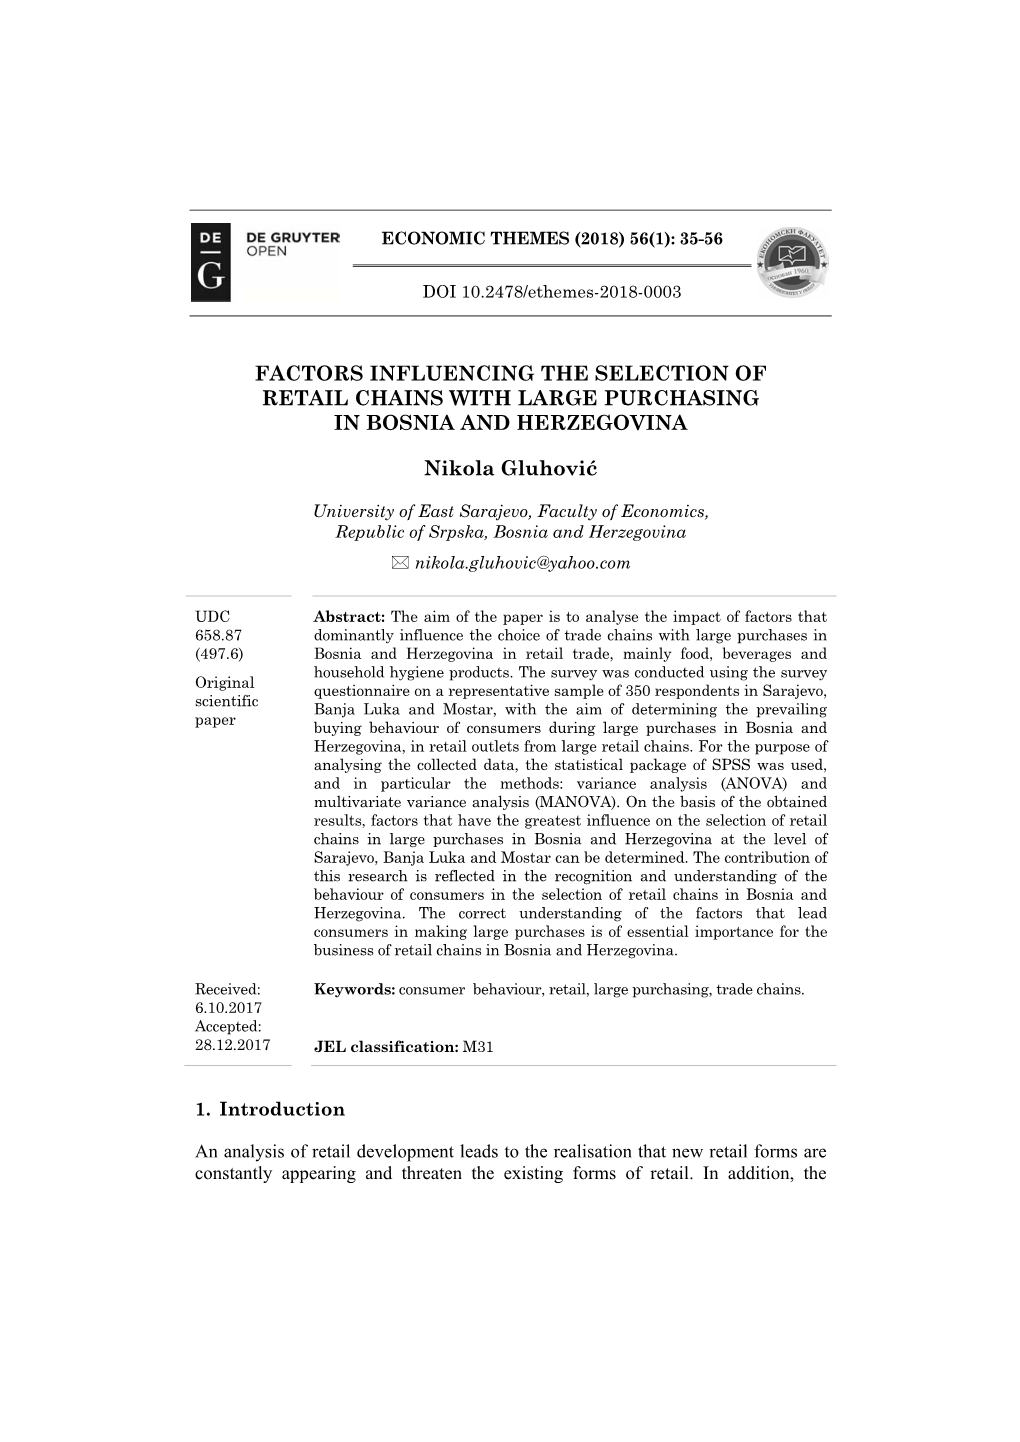 Factors Influencing the Selection of Retail Chains with Large Purchasing in Bosnia and Herzegovina